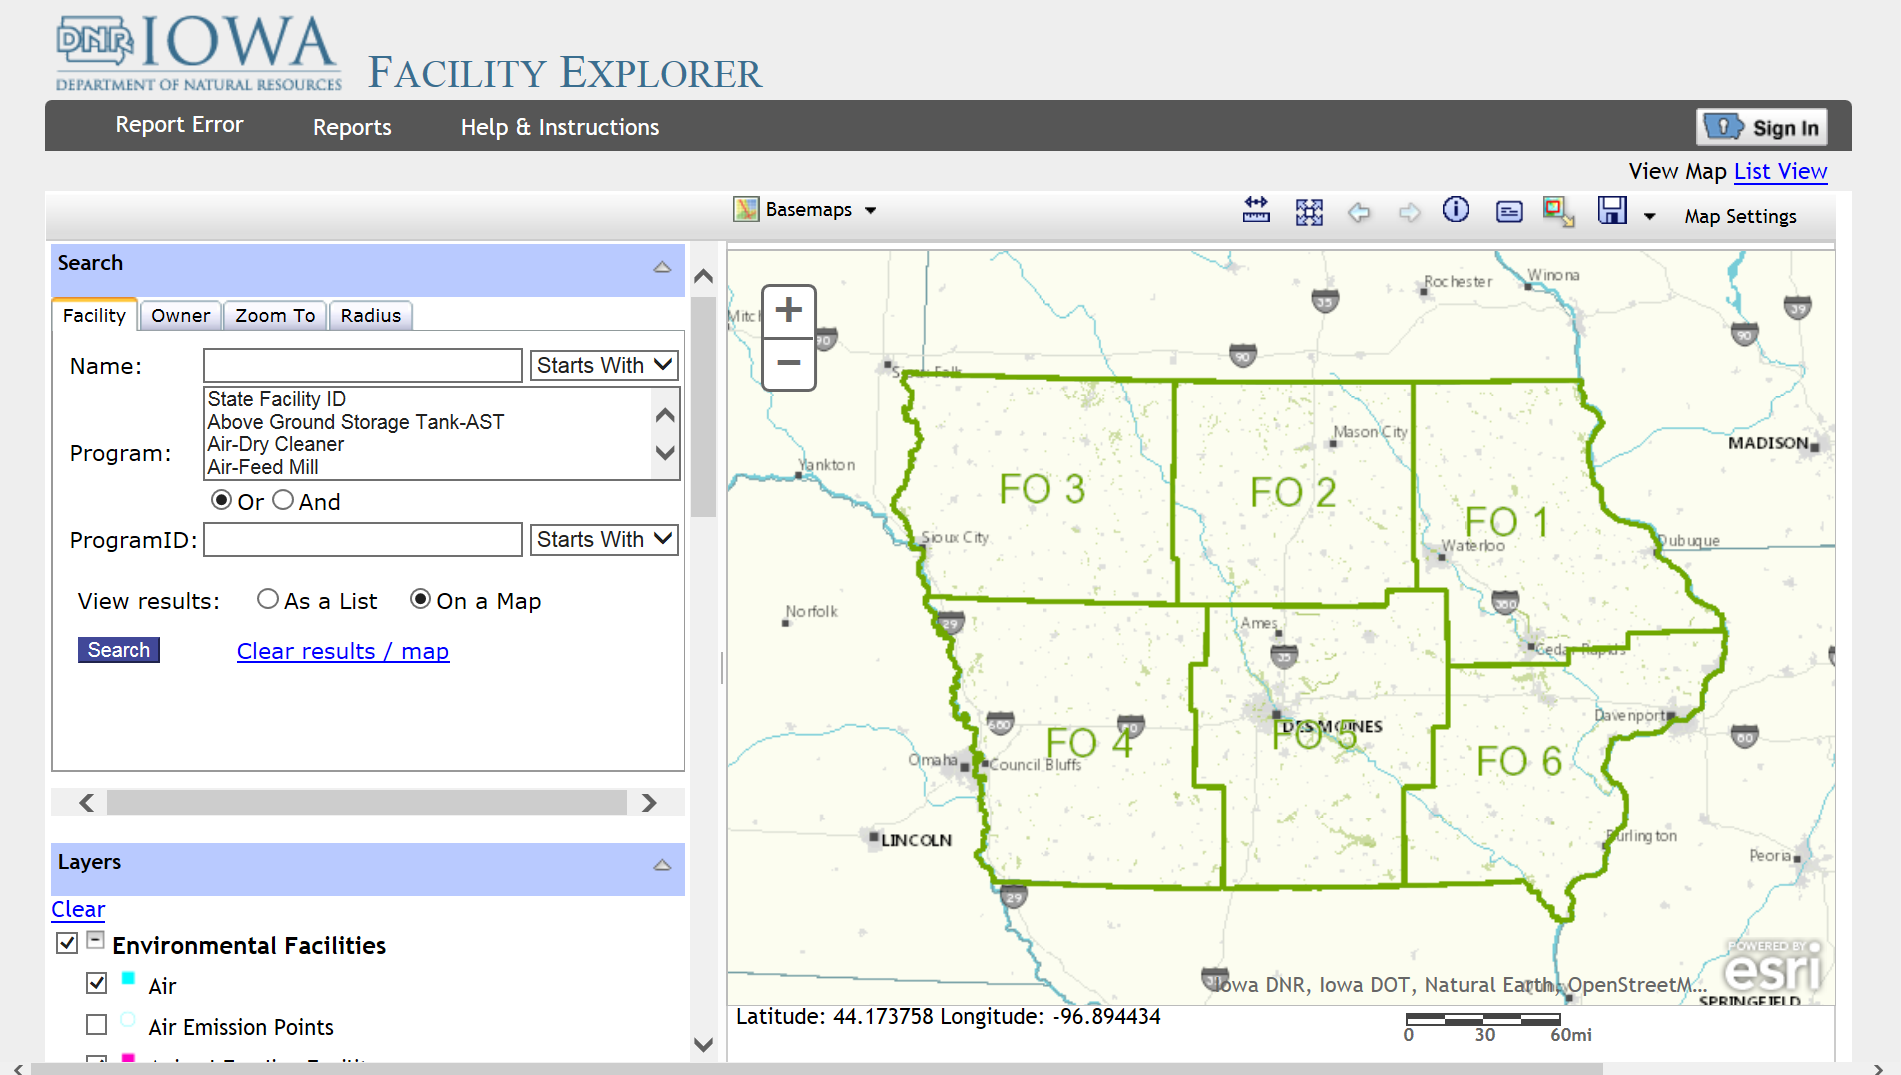 Link for Iowa DNR Facility Explorer and image